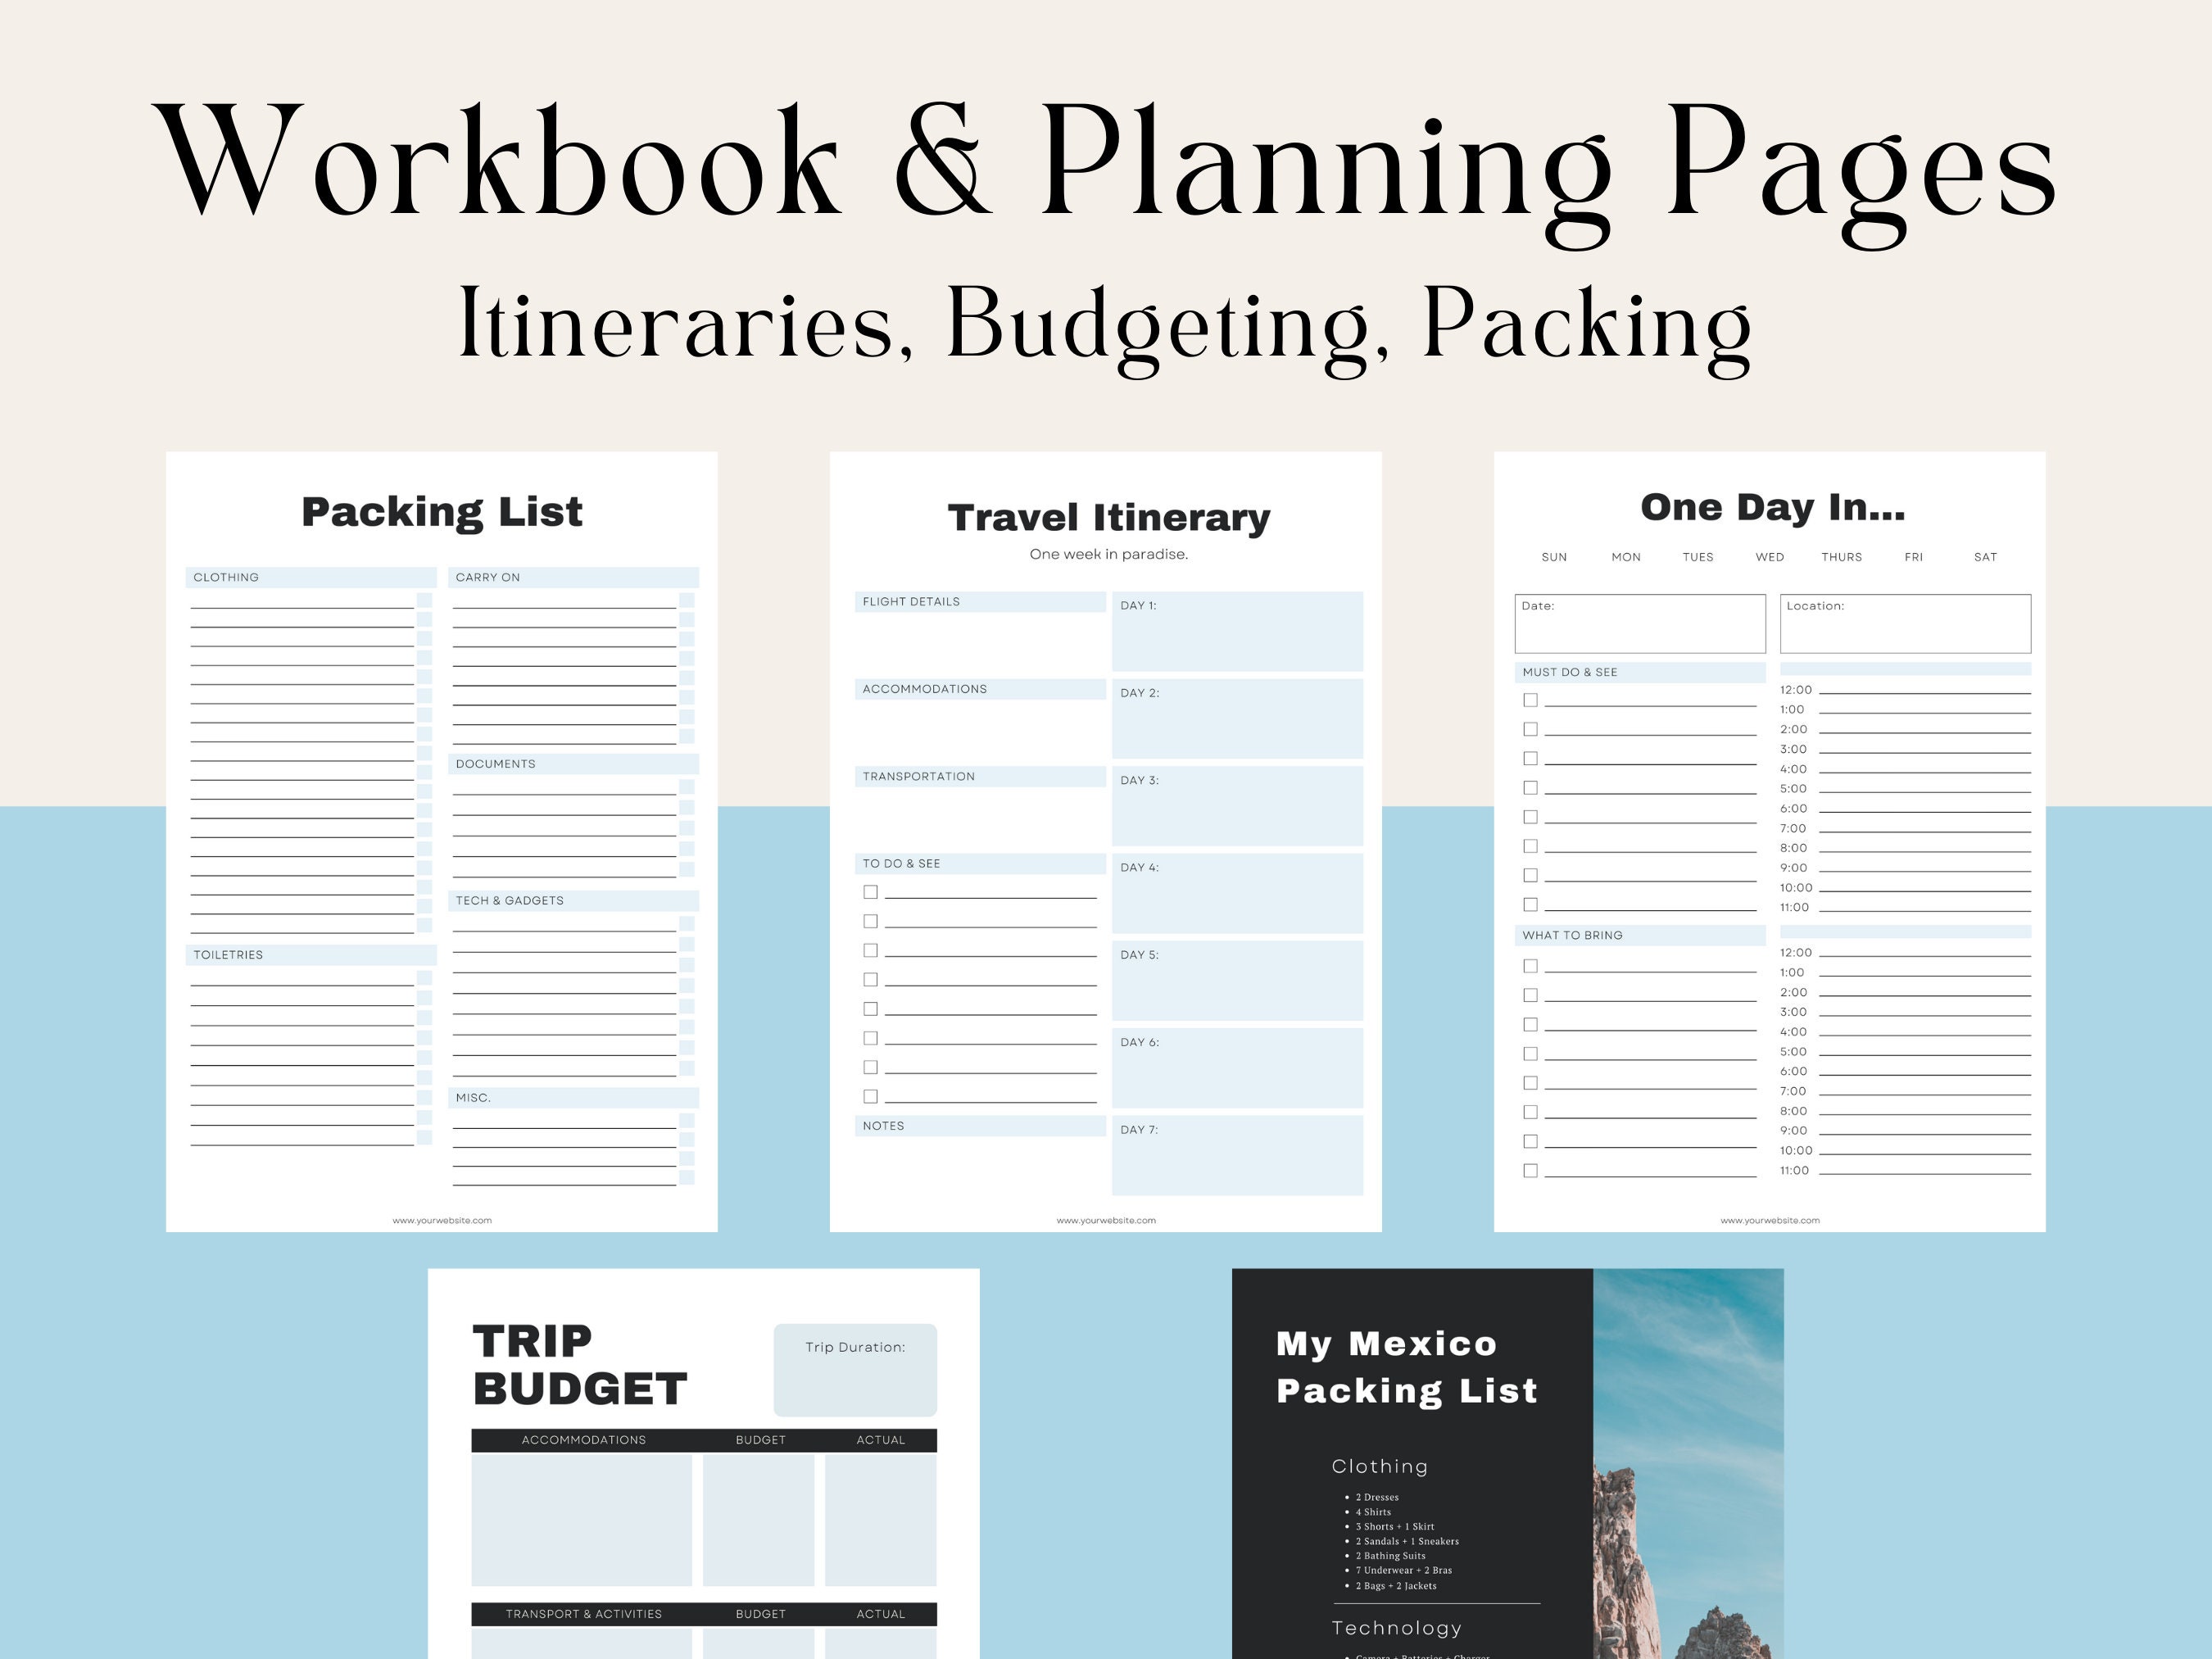 TRAVEL GUIDE Archives - Travel Planning and Itinerary Services